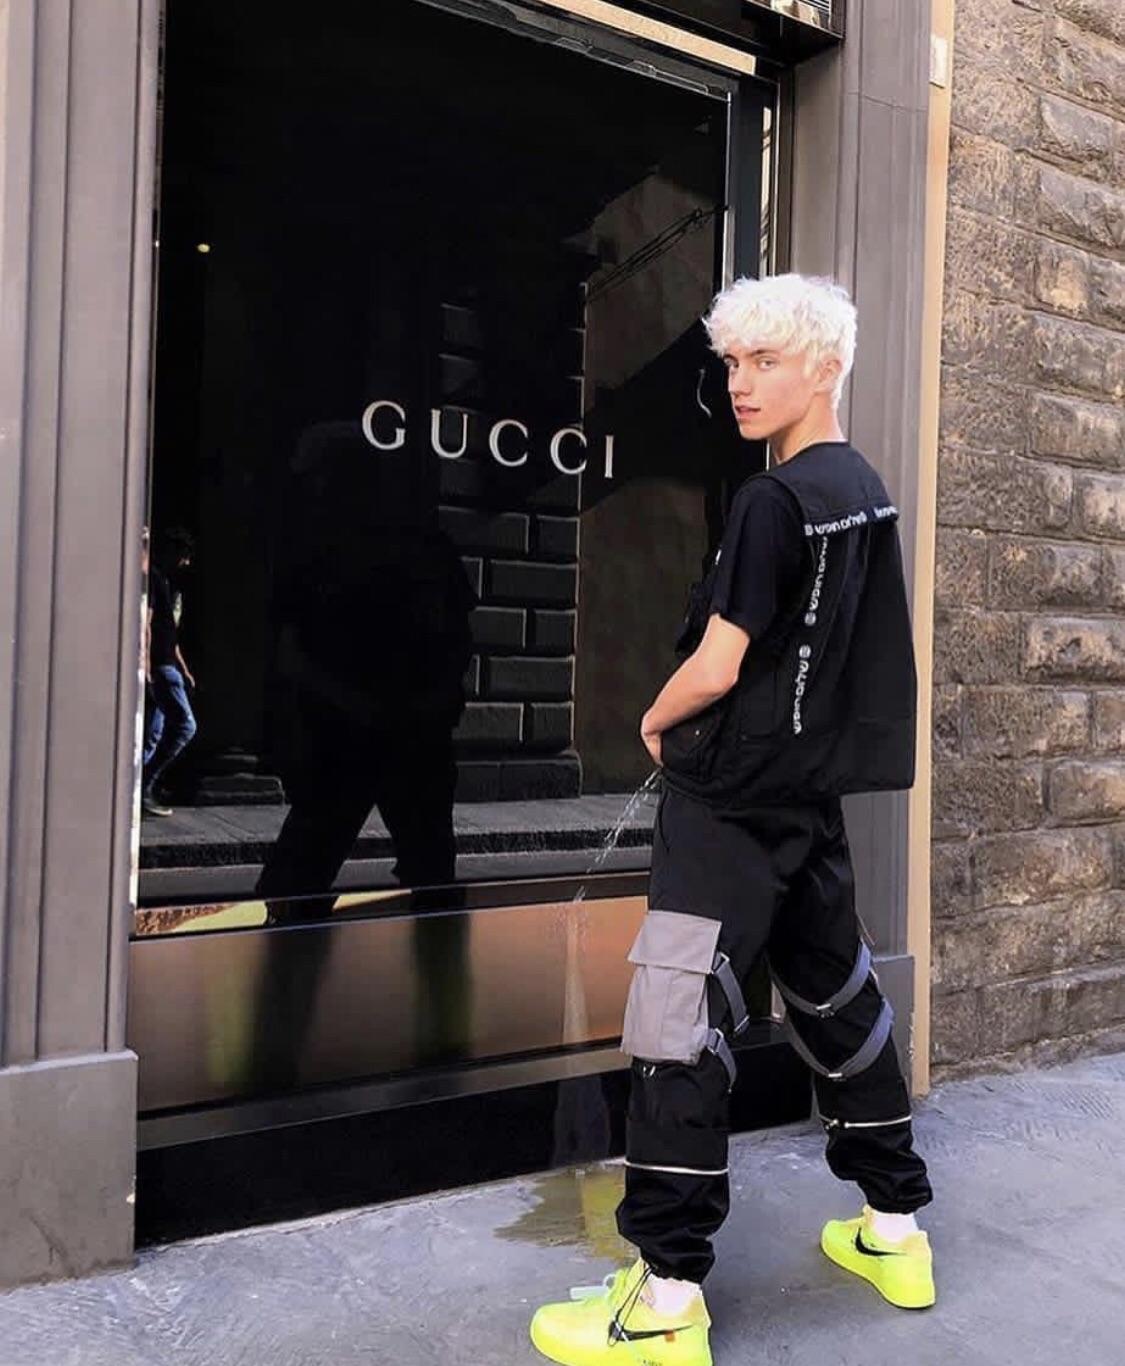 guy peeing on gucci